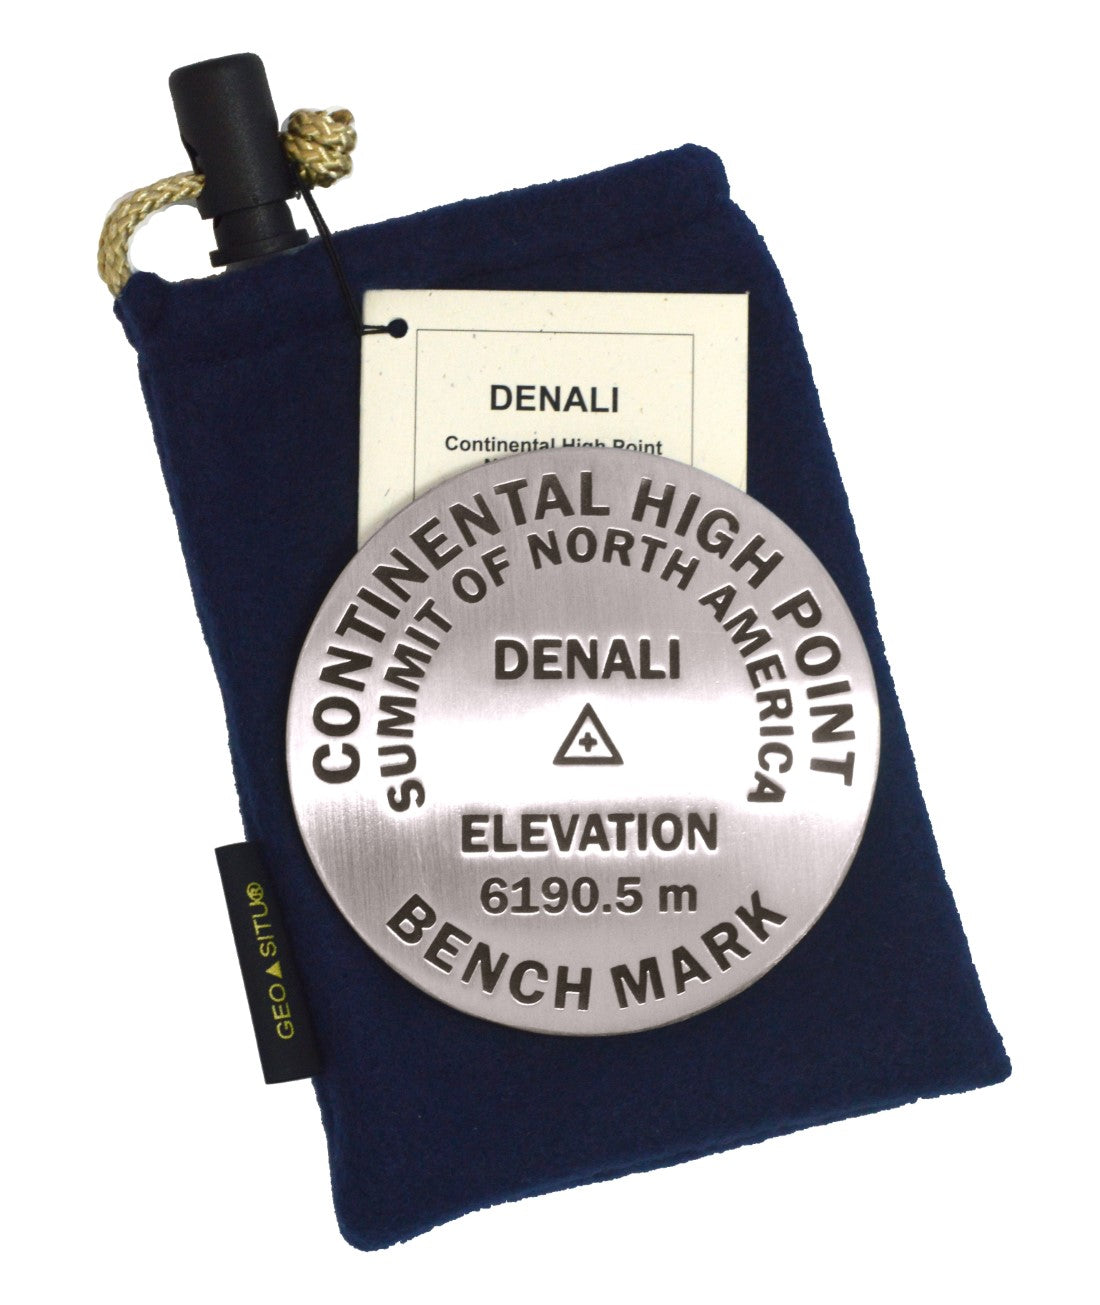 DENALI Paperweight (Continental High Point) NEW Elevation